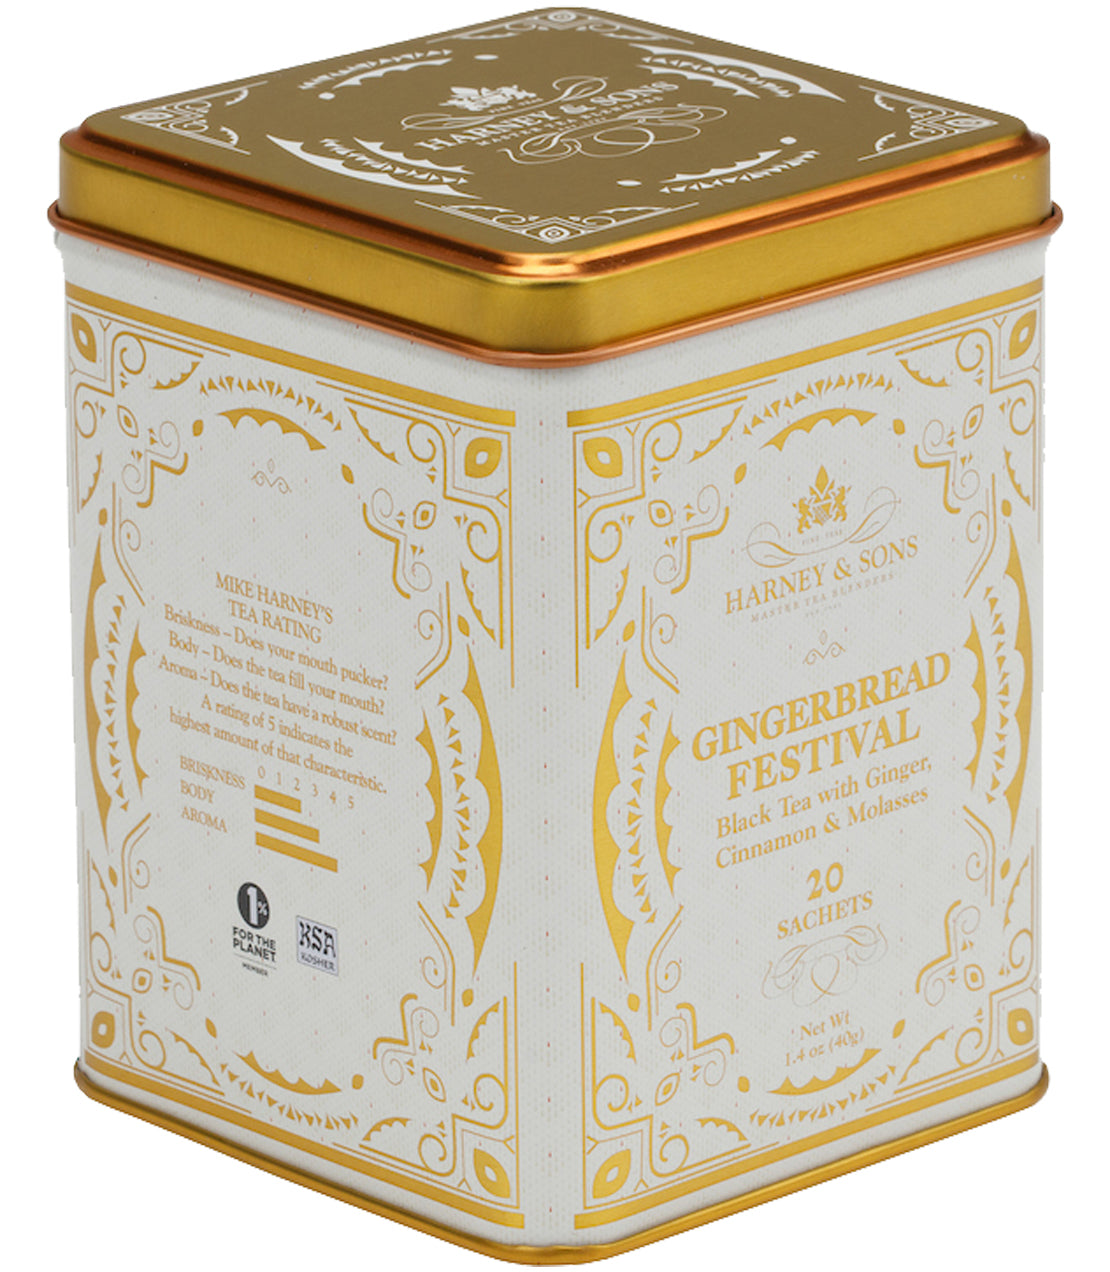 Black tea with gingerbread flavours - Gingerbread Festival Tea, tin of 20 sachets by Harney & Sons Fine Teas Europe